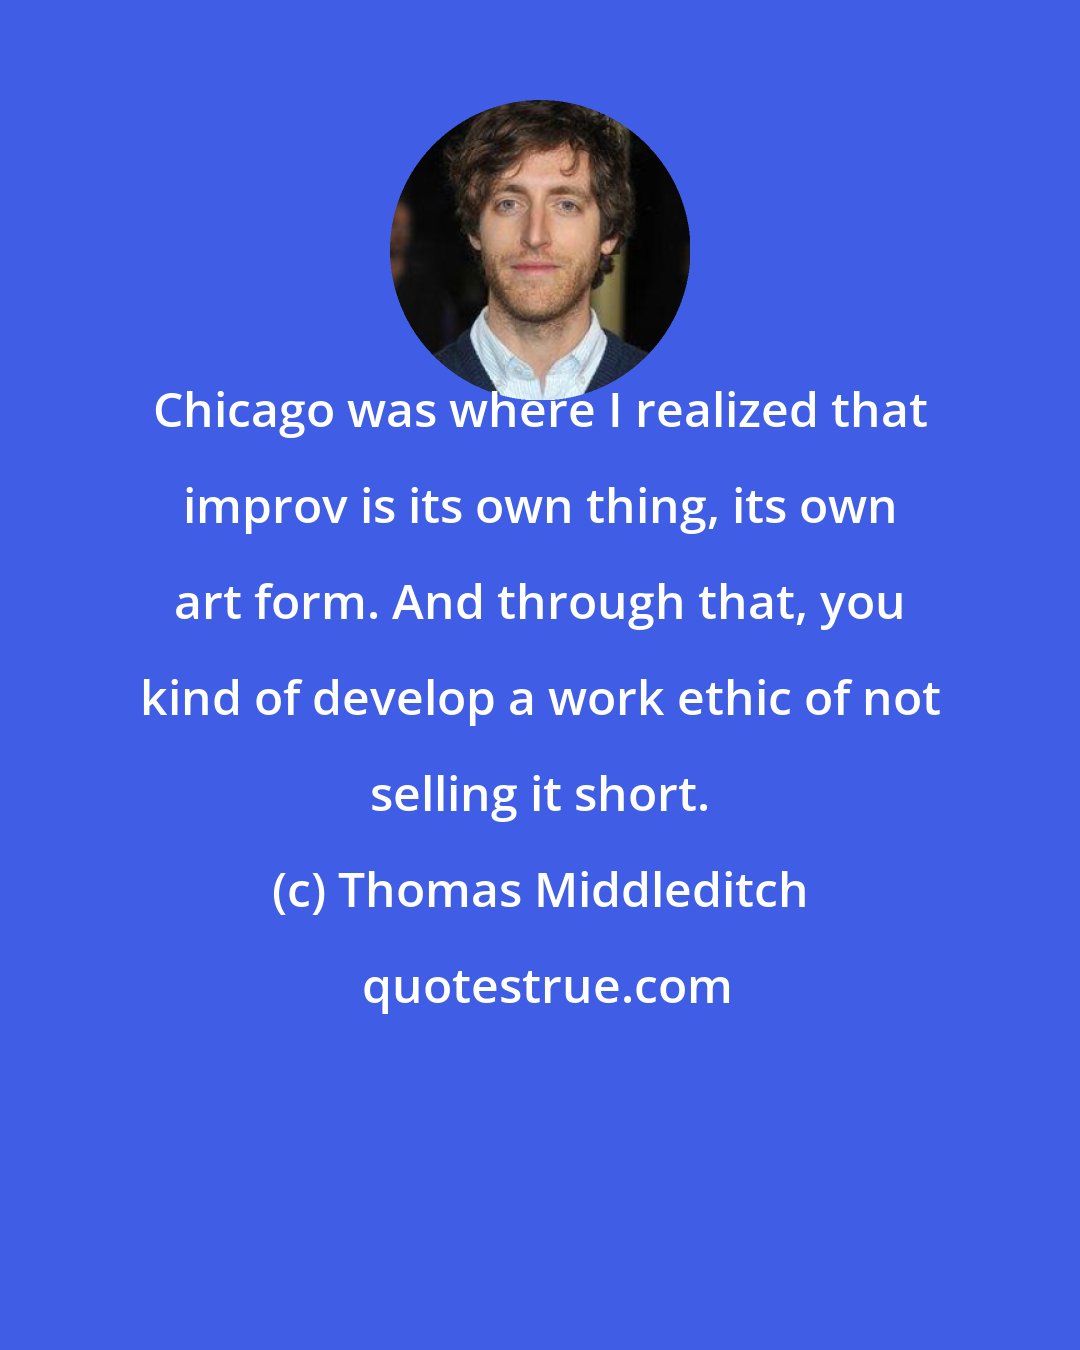 Thomas Middleditch: Chicago was where I realized that improv is its own thing, its own art form. And through that, you kind of develop a work ethic of not selling it short.